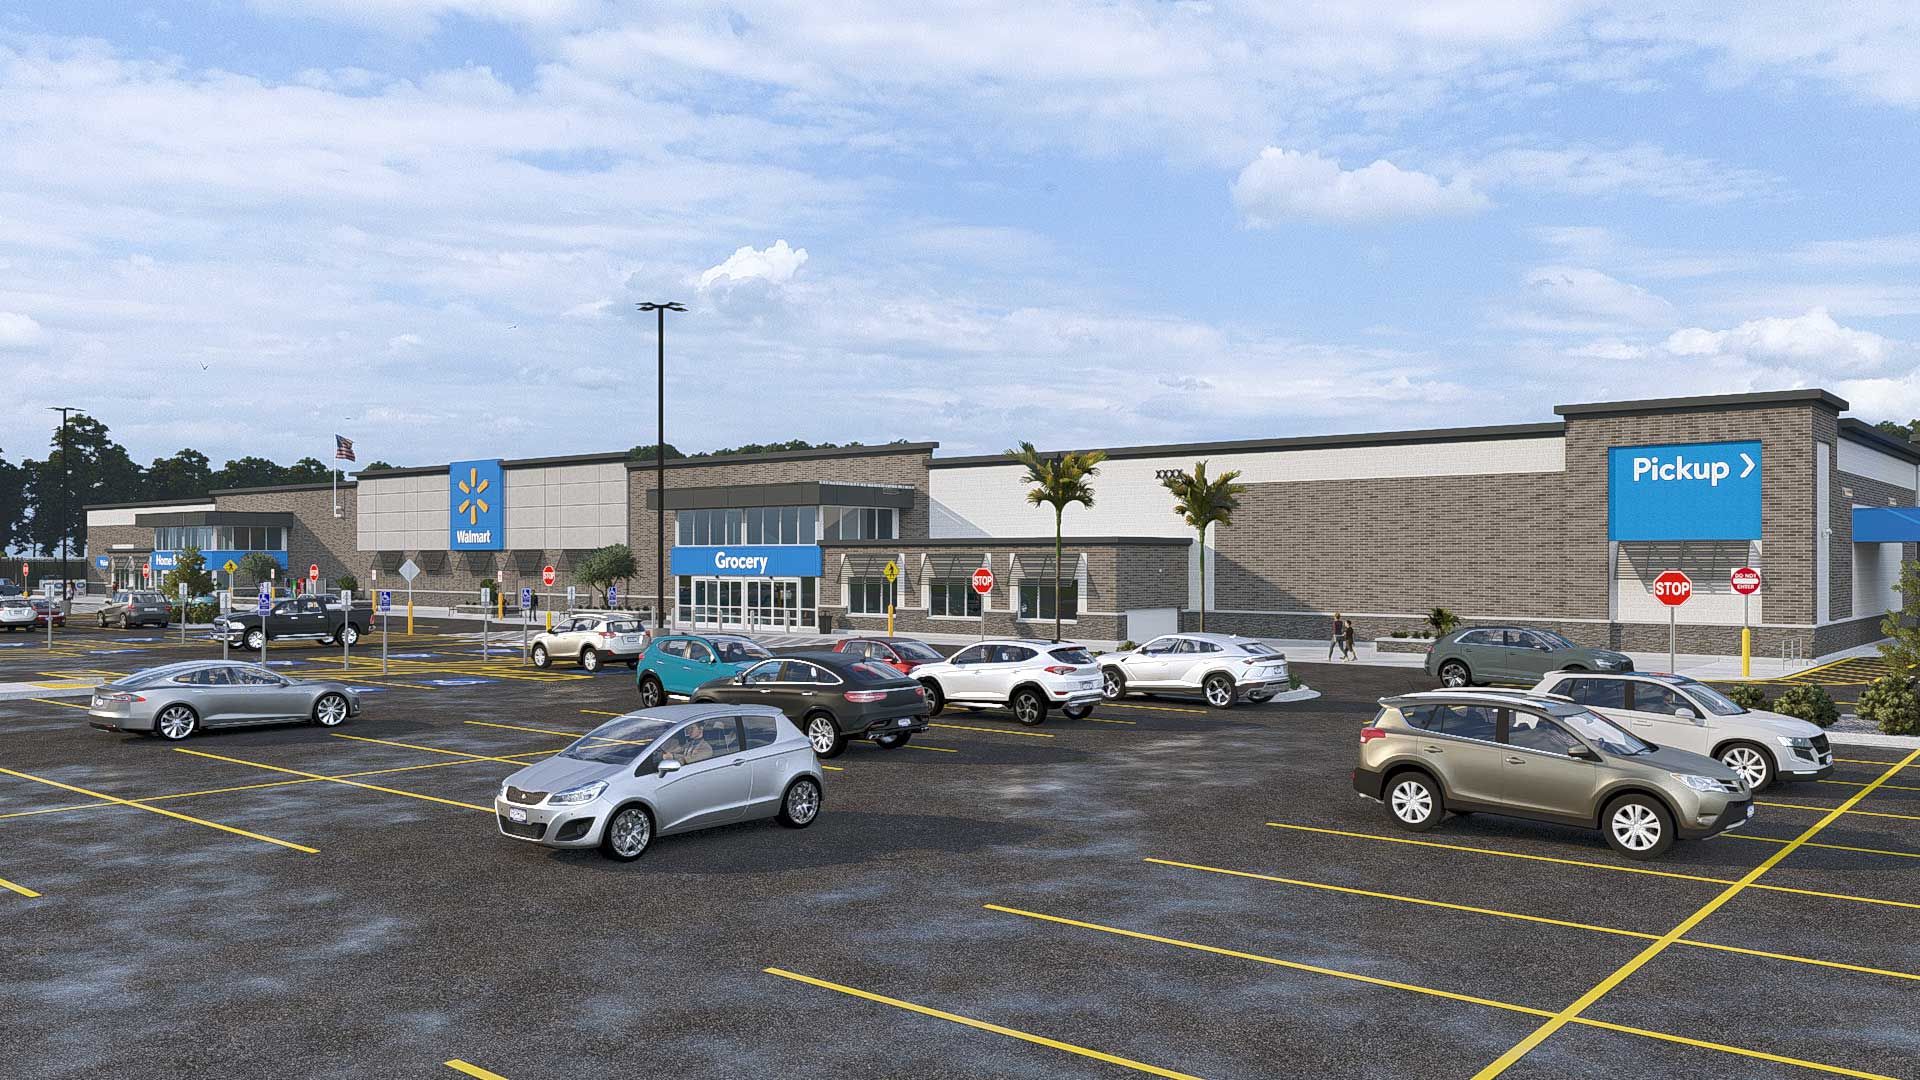 An artists' rendering of a new Walmart Supercenter with cars parked in the foreground and the building in background.